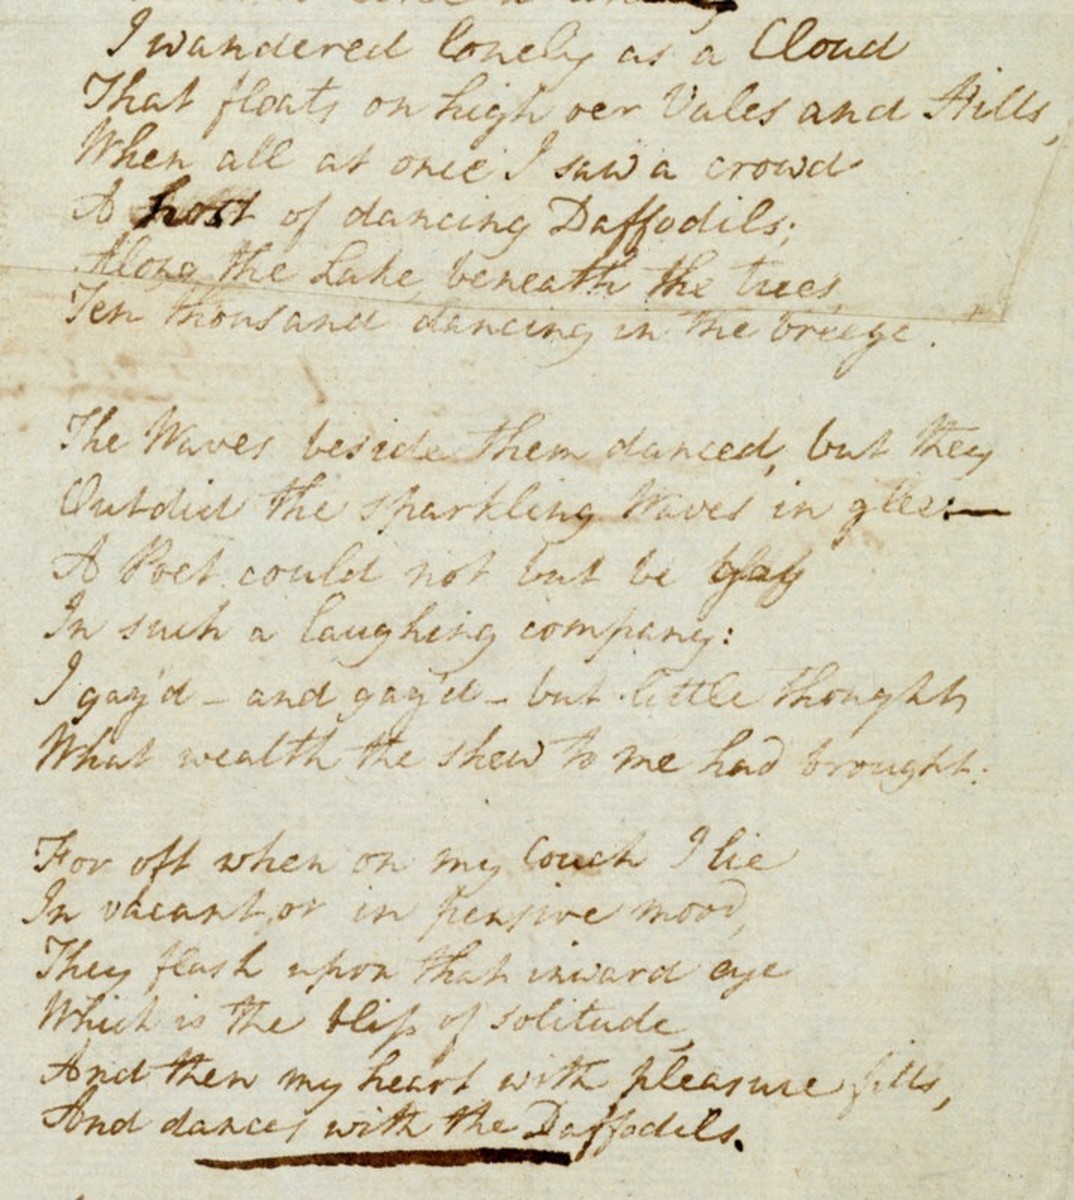 Wordsworth wrote several versions of his famous poem about daffodils. This is one of them, written in his own handwriting.